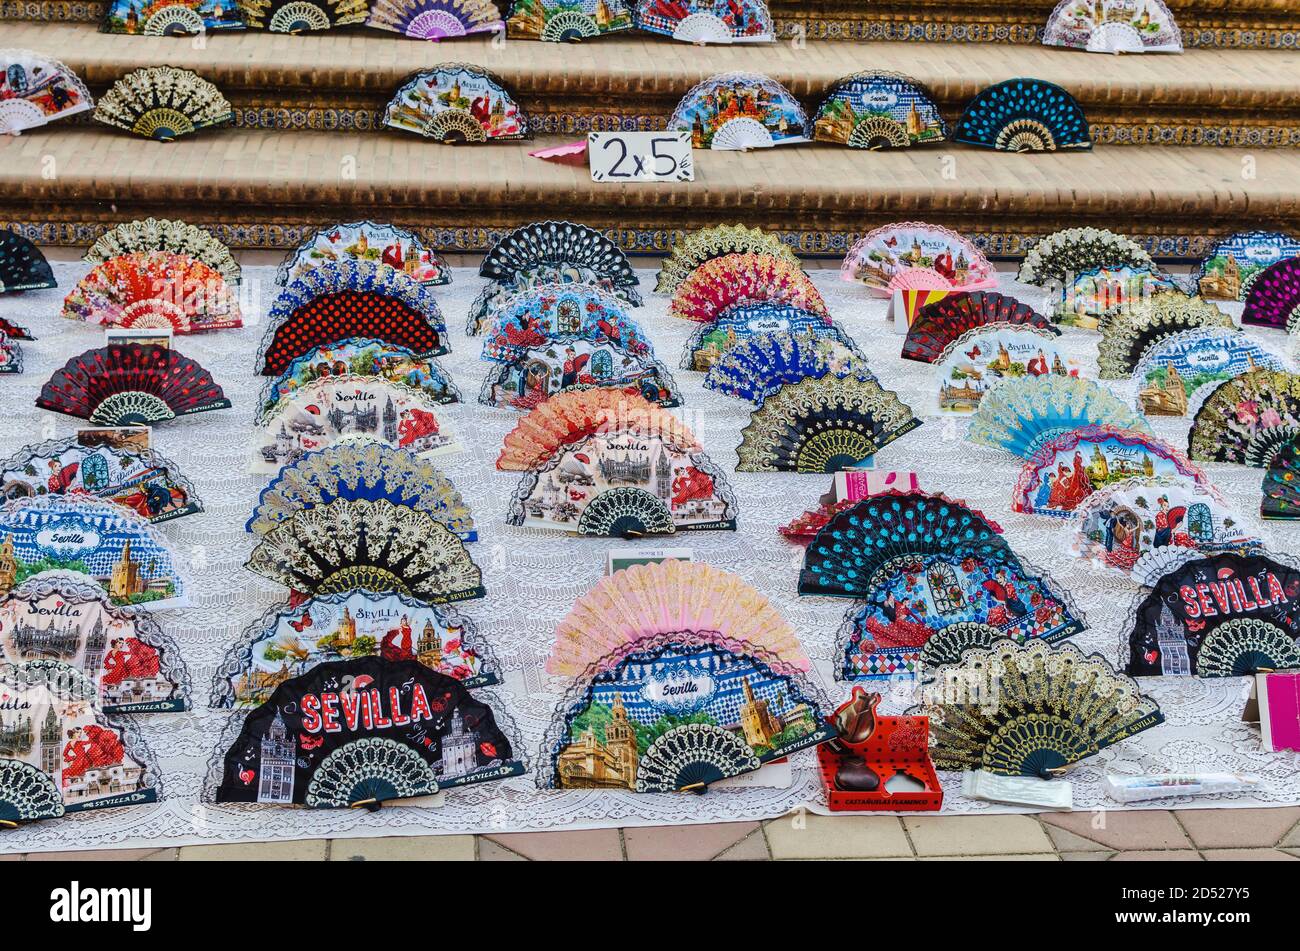 Typical hand fans stand in Plaza de España, Seville, Spain Stock Photo